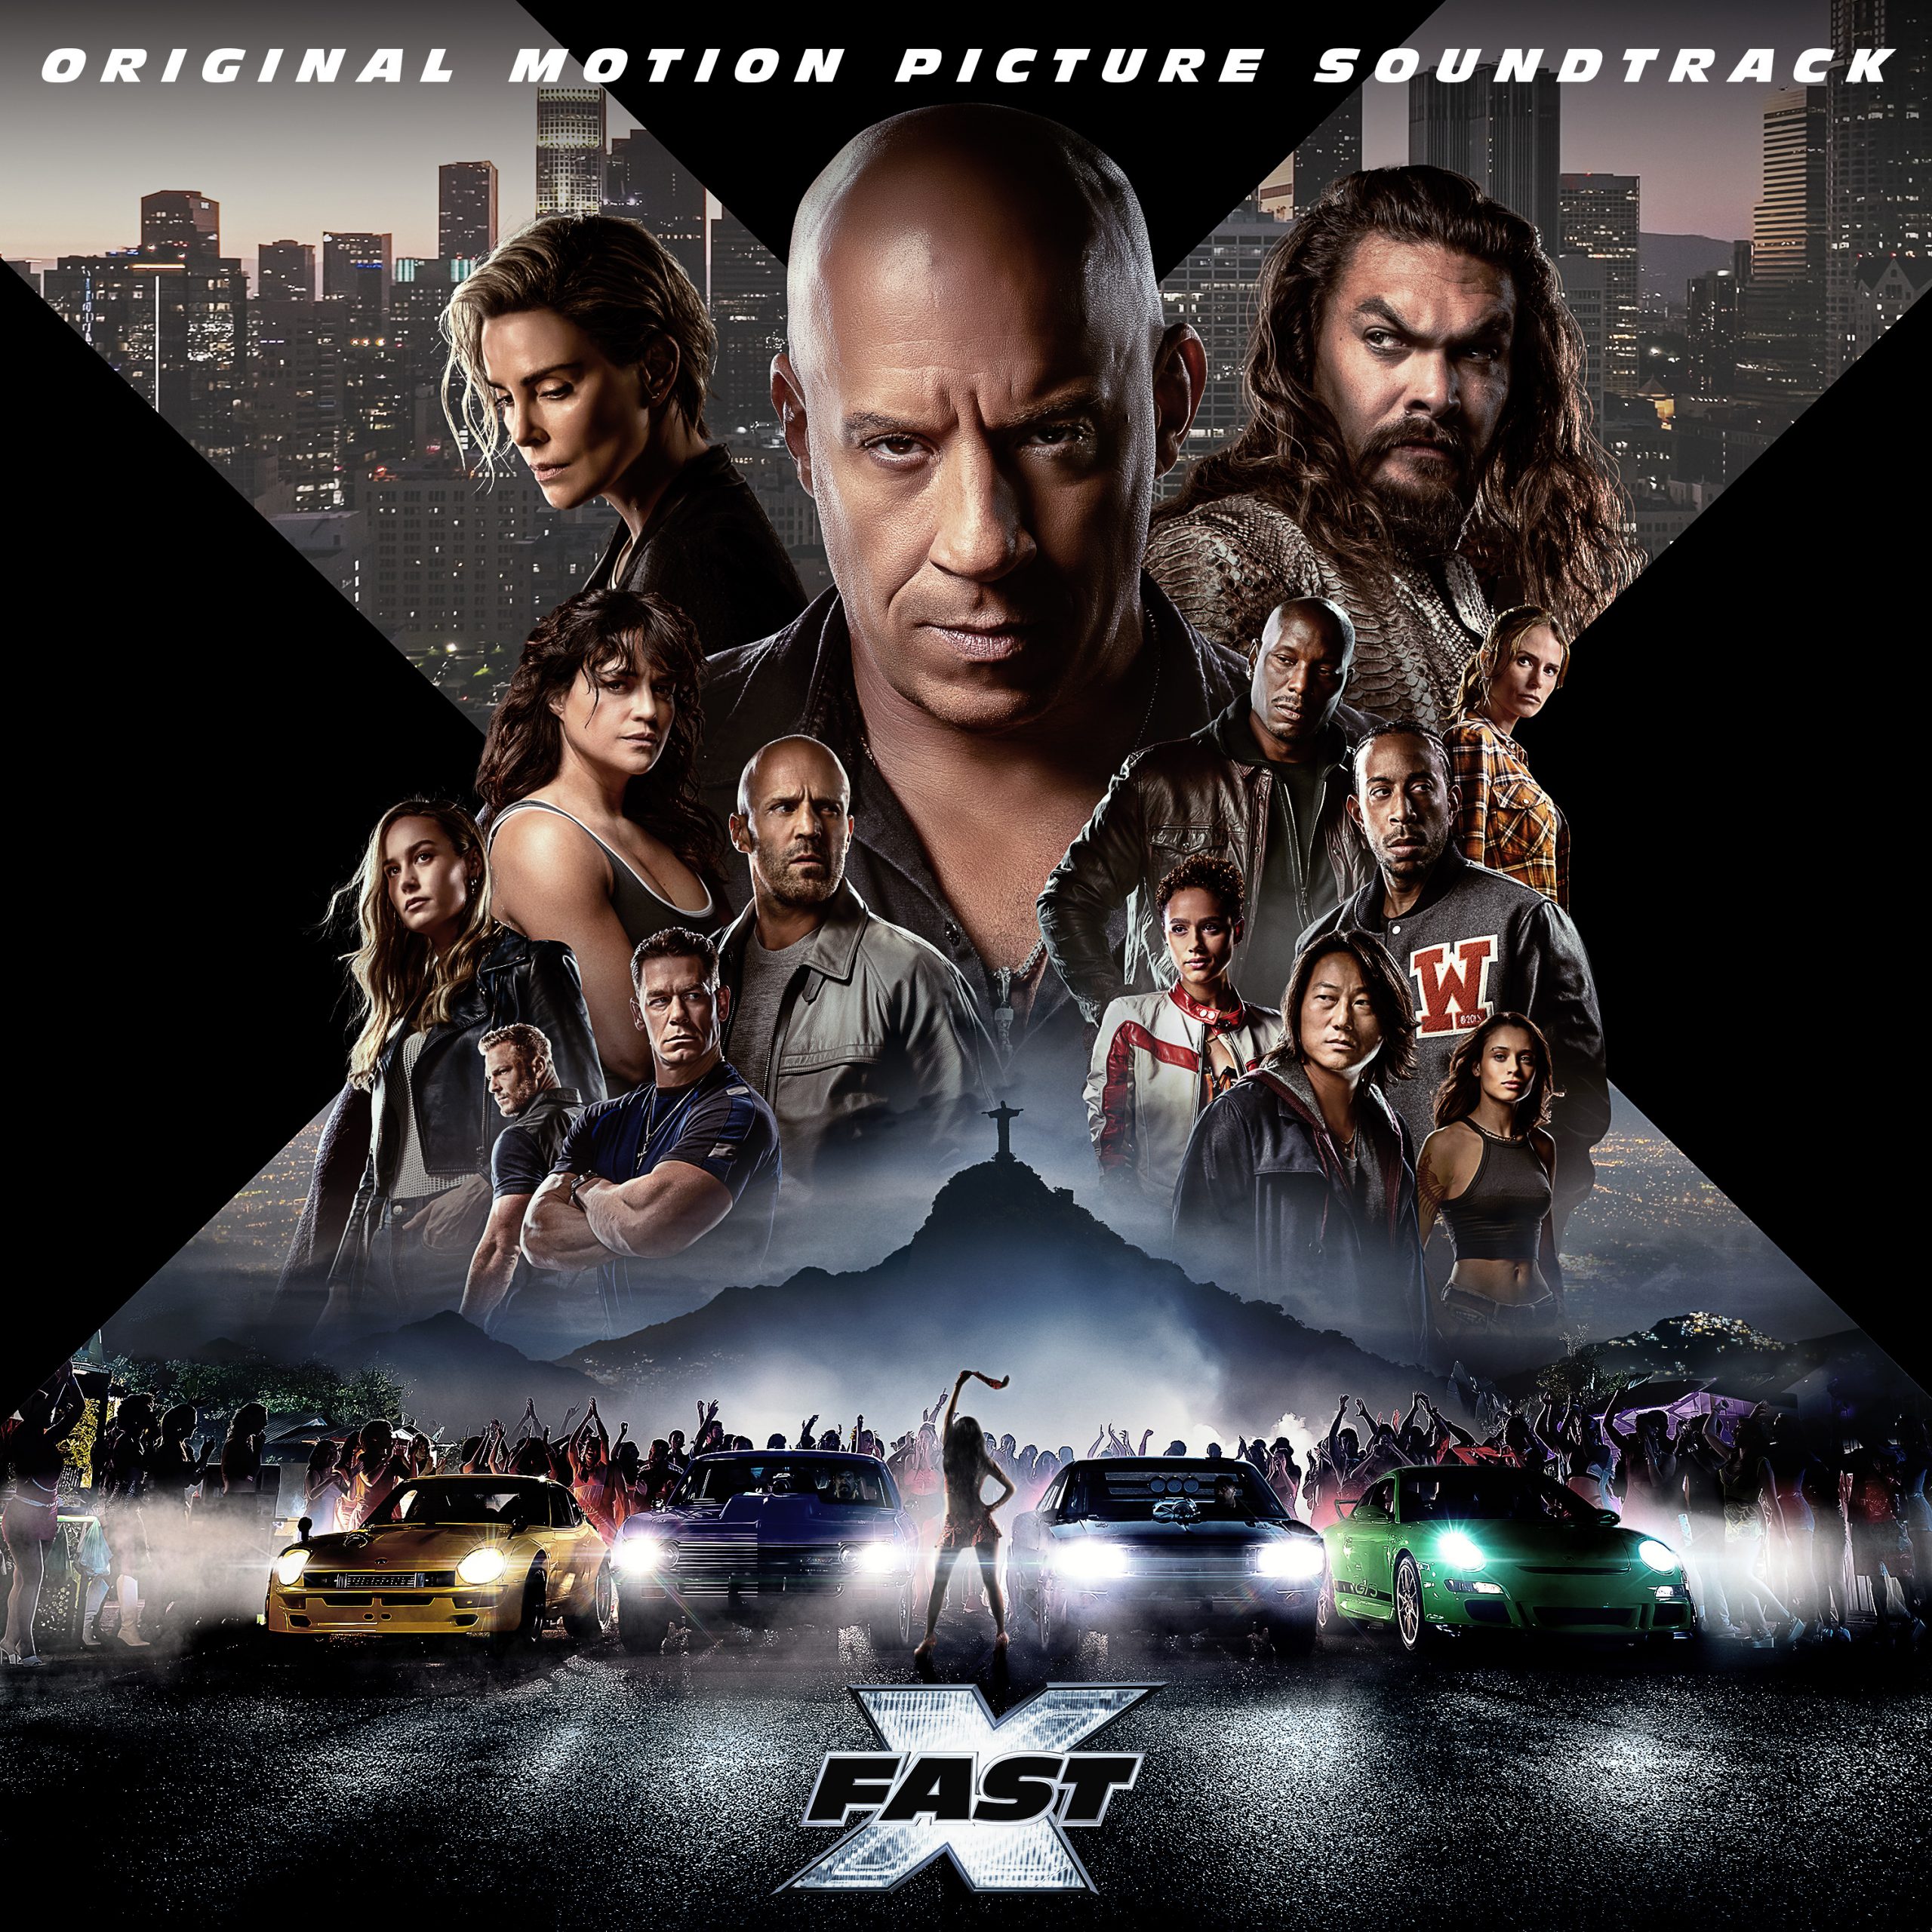 ARTIST PARTNER GROUP AND UNIVERSAL PICTURES, IN PARTNERSHIP WITH UNIVERSAL  MUSIC GROUP, UNVEIL TRACK LIST FOR FAST X: ORIGINAL MOTION PICTURE  SOUNDTRACK - UMG